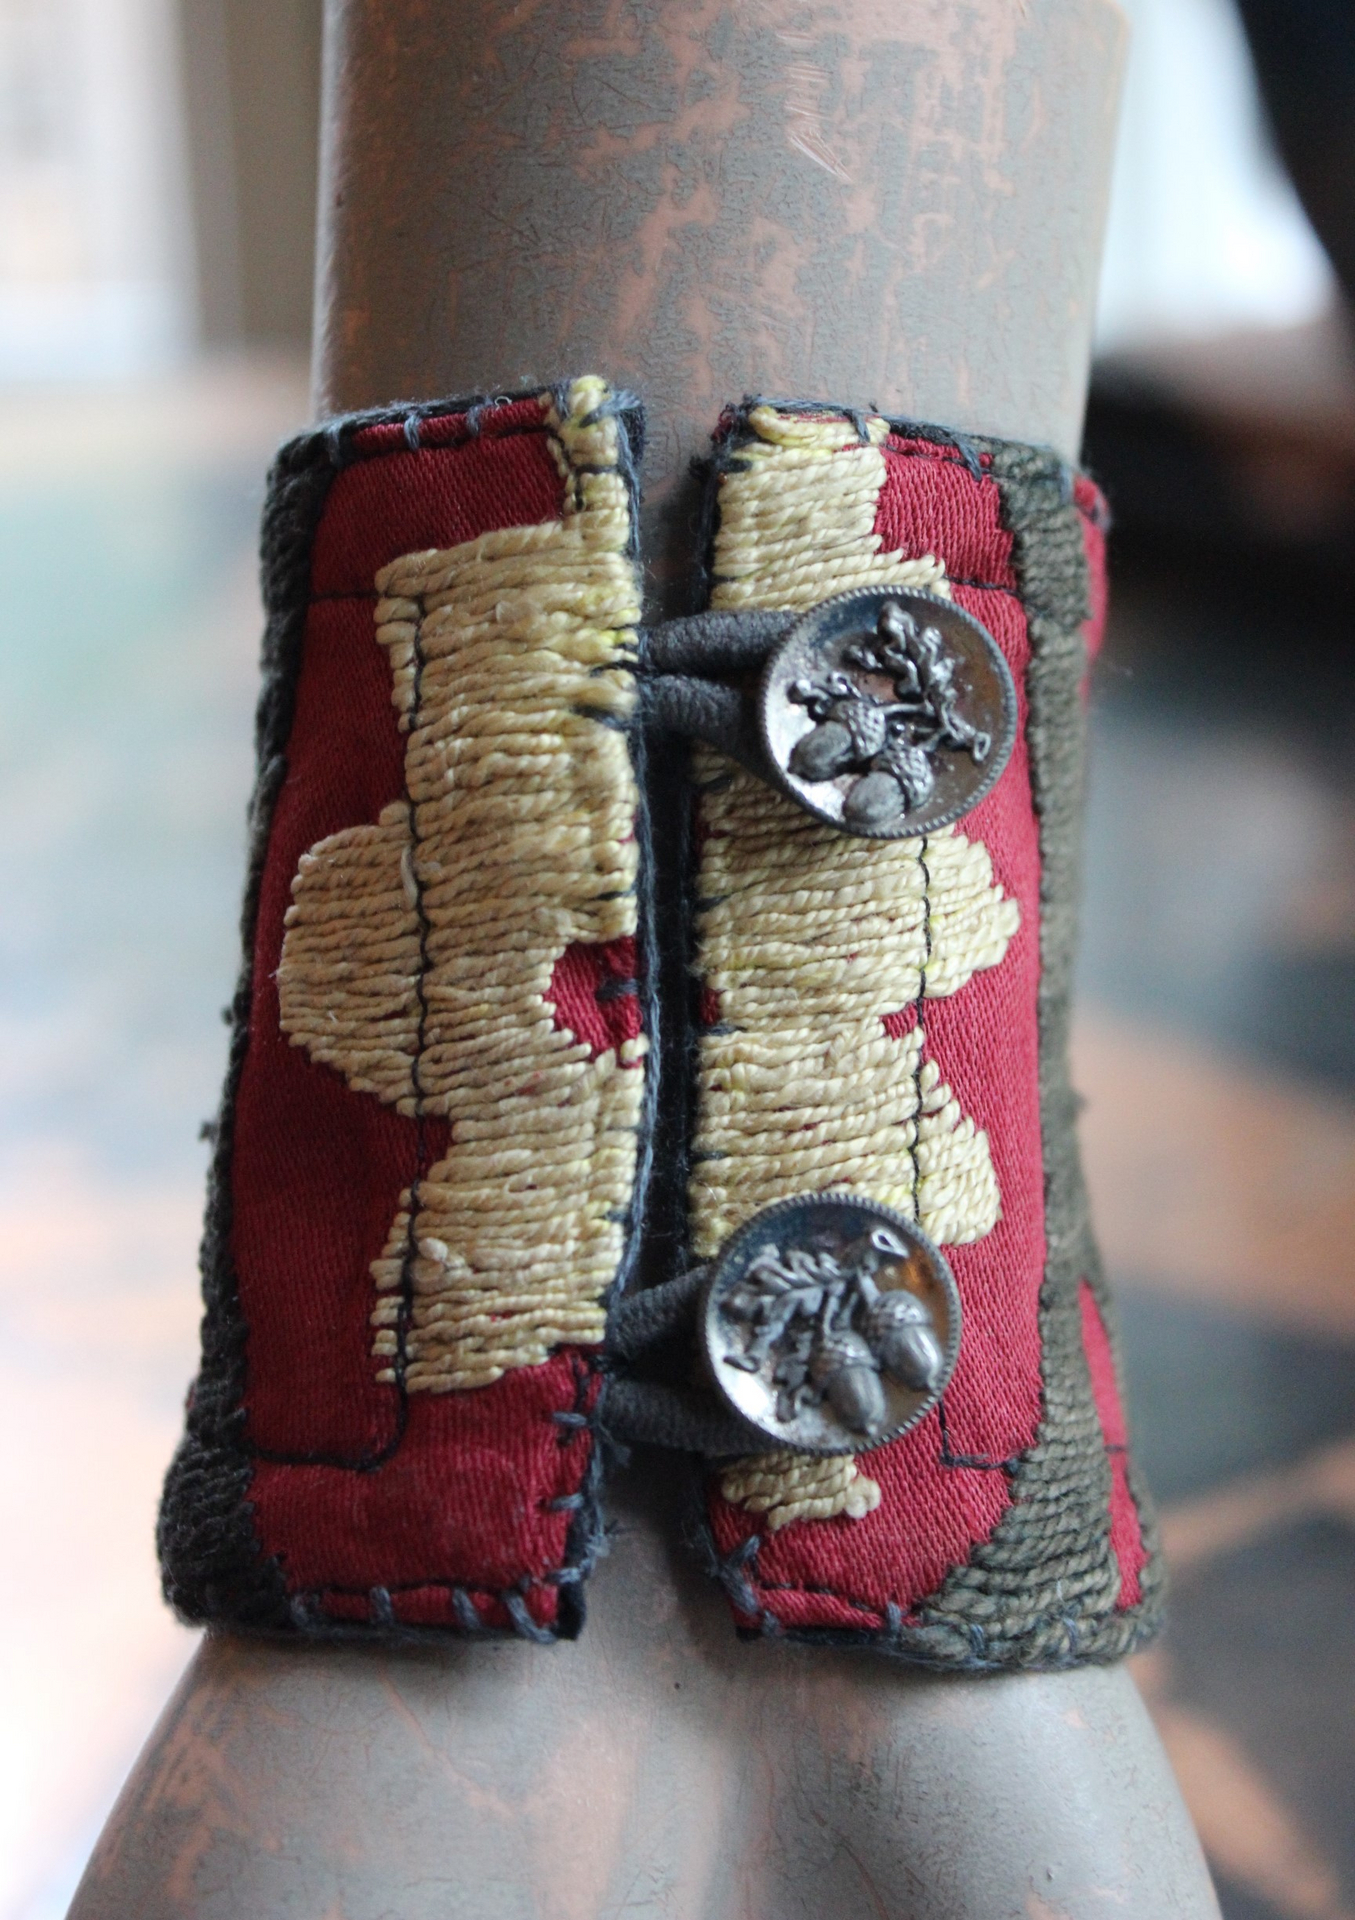 Allow Your Soul Cuff Bracelet with Antique Embroidered Textile, Antique French Medals,Faceted Almandine Garnet & Religious Rose